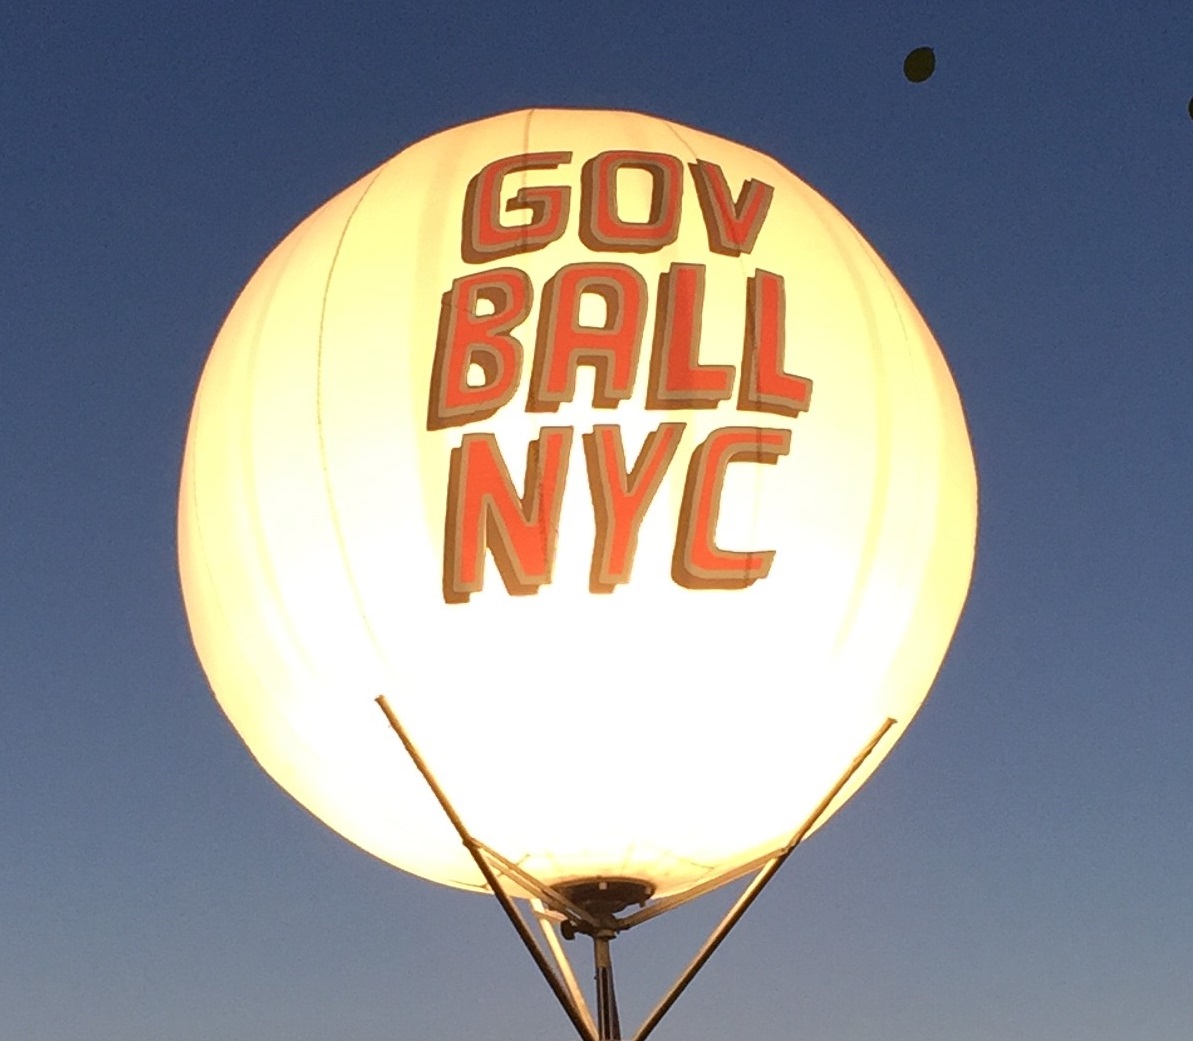 Capalino highlights Corporate Social Responsibility efforts for Governors Ball 